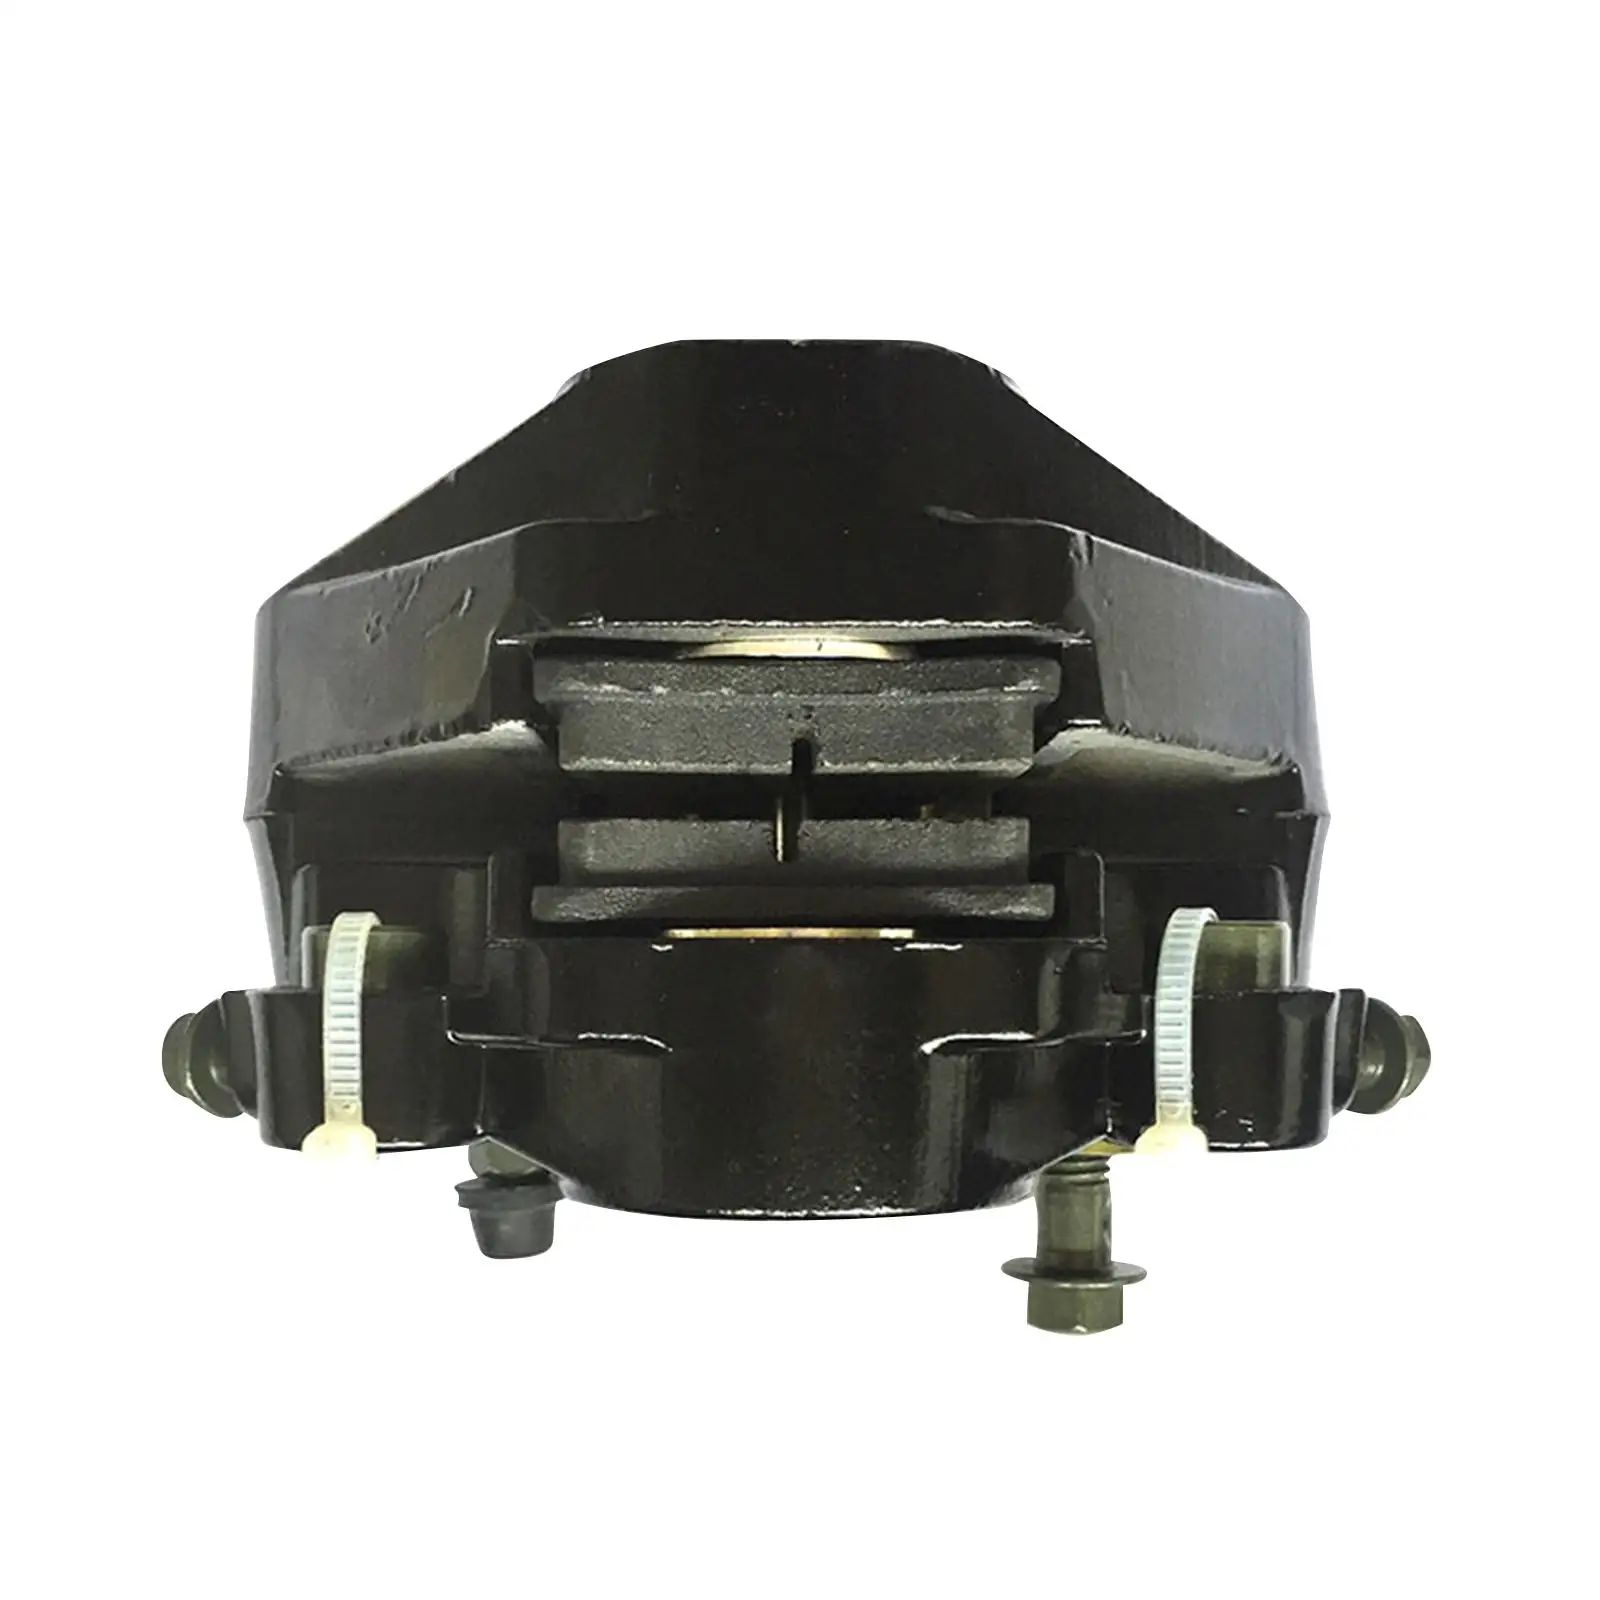 Motorbikes Hydraulic Brake Caliper Accessory with Brake Pad Replaces Easily